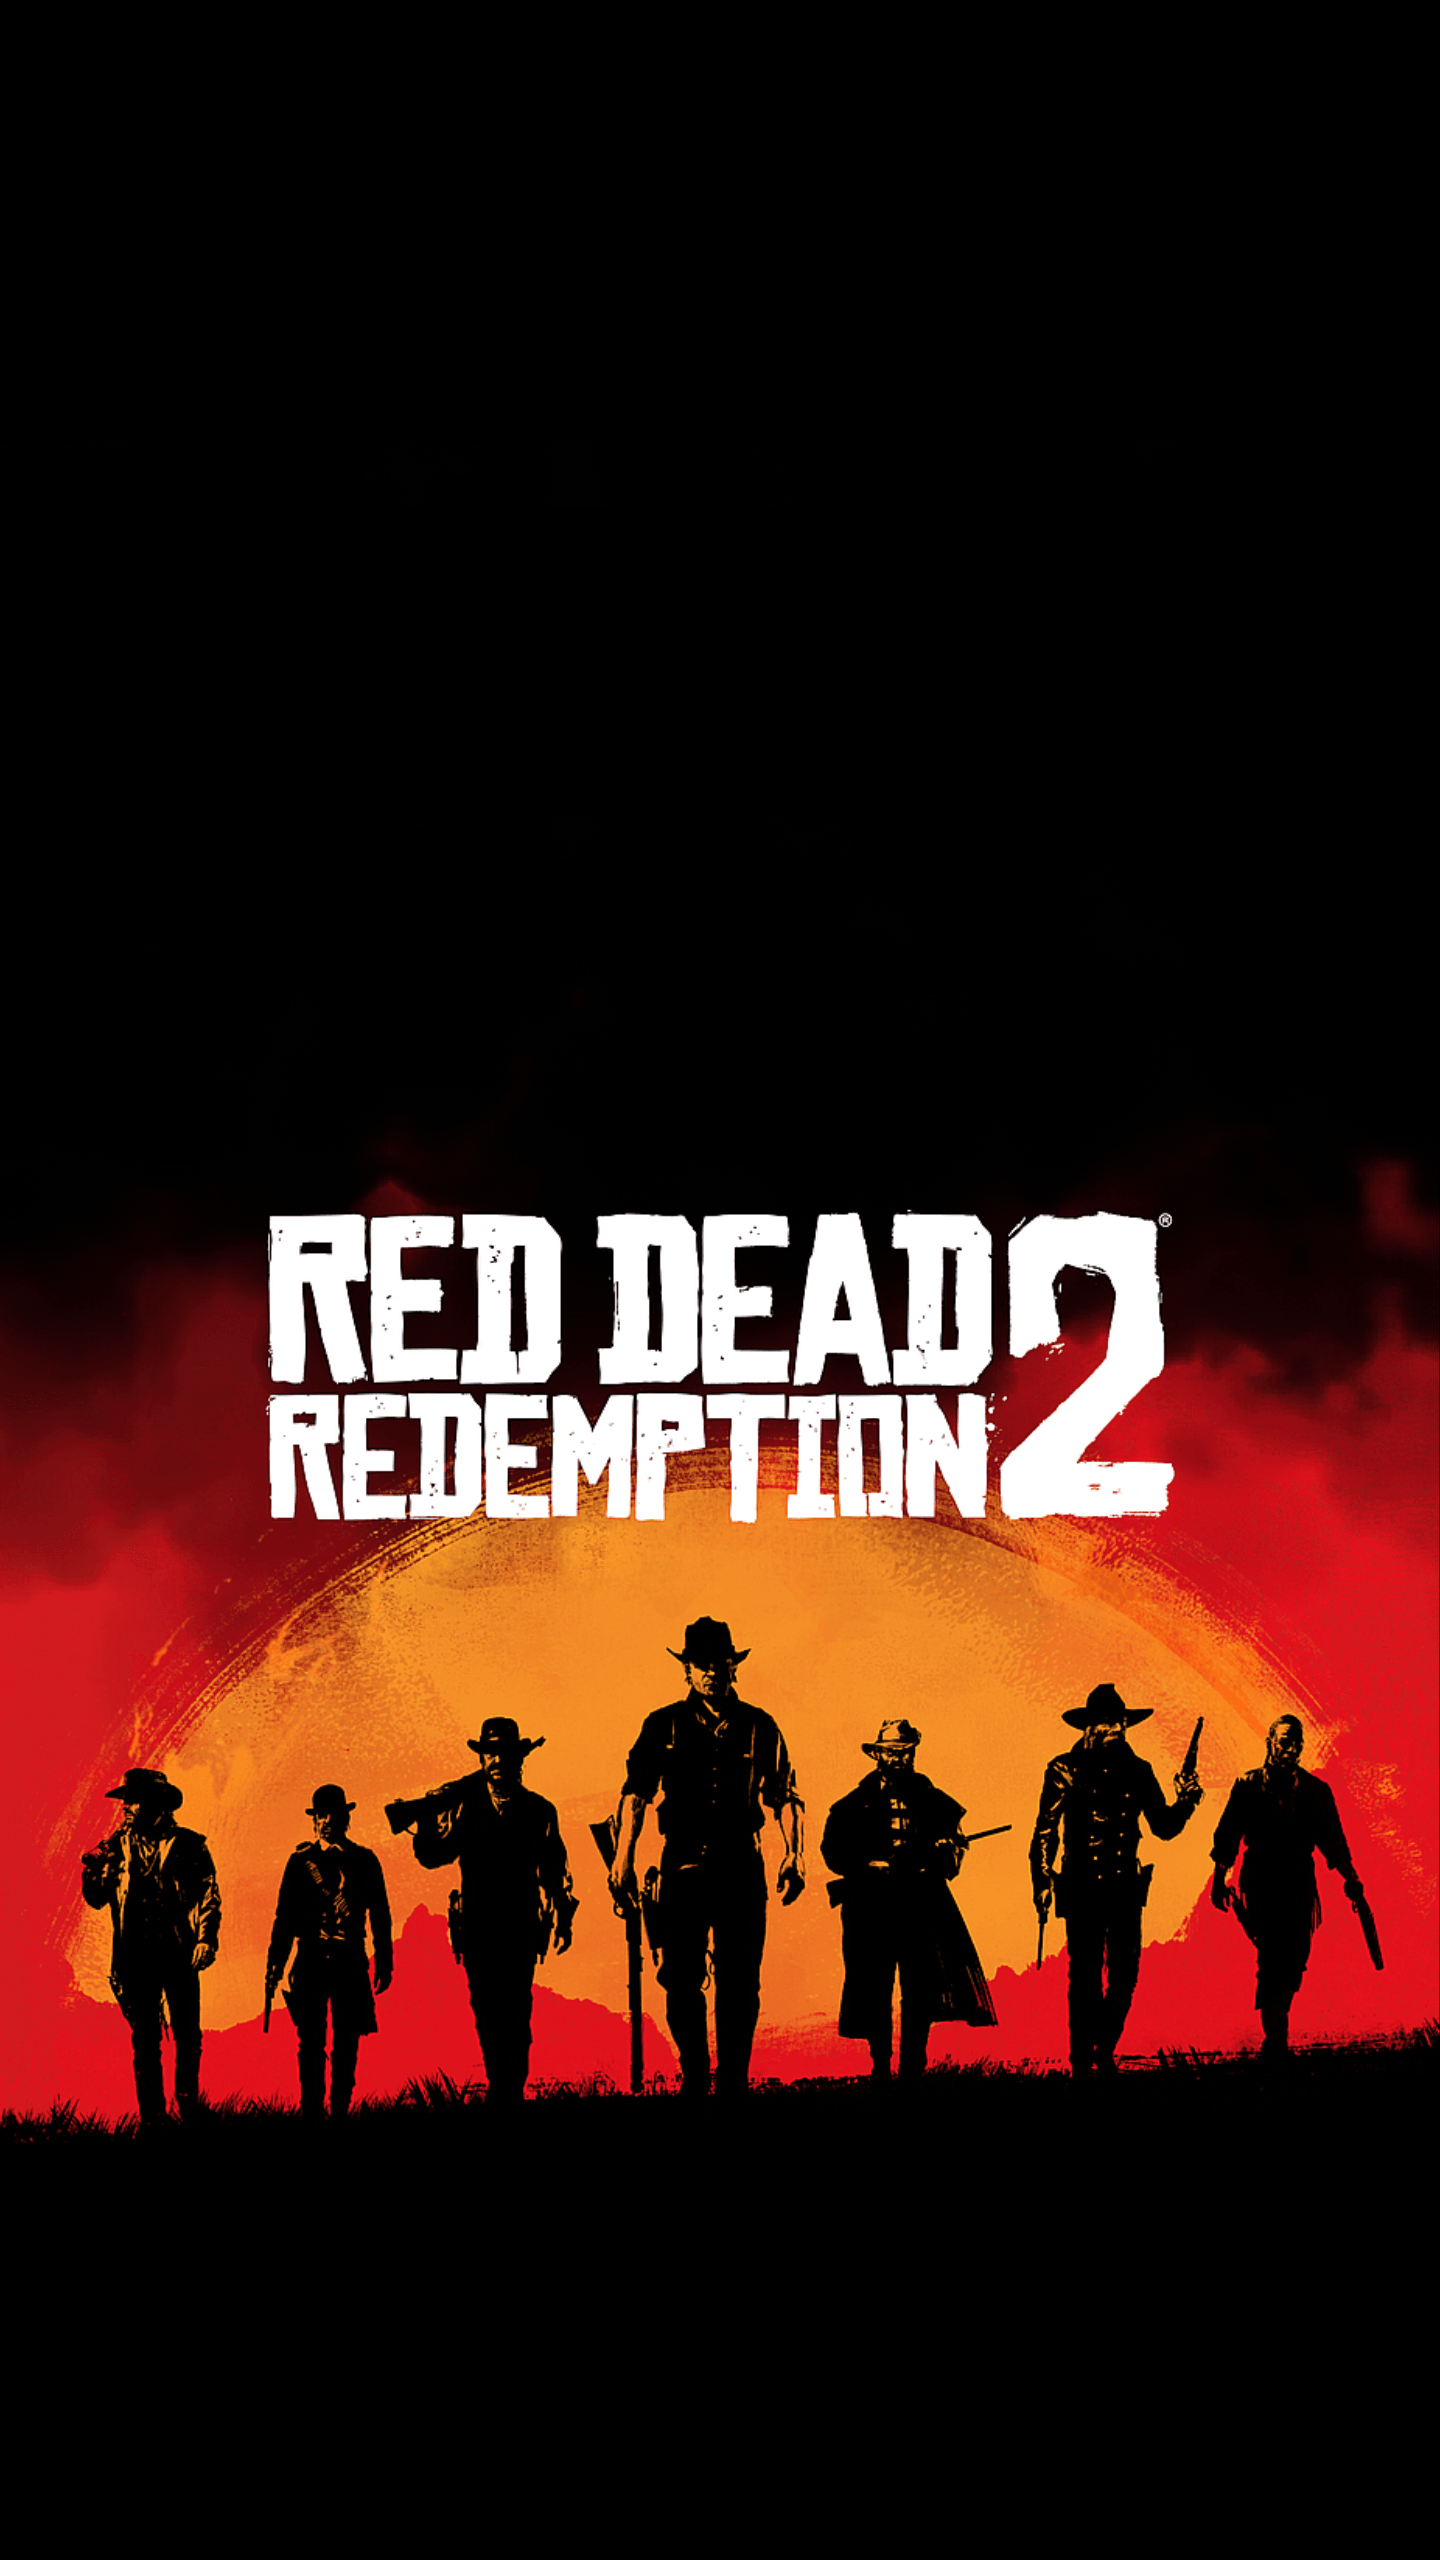 720x1280 Red Dead Redemption 2 Wallpapers for Mobile Phone HD